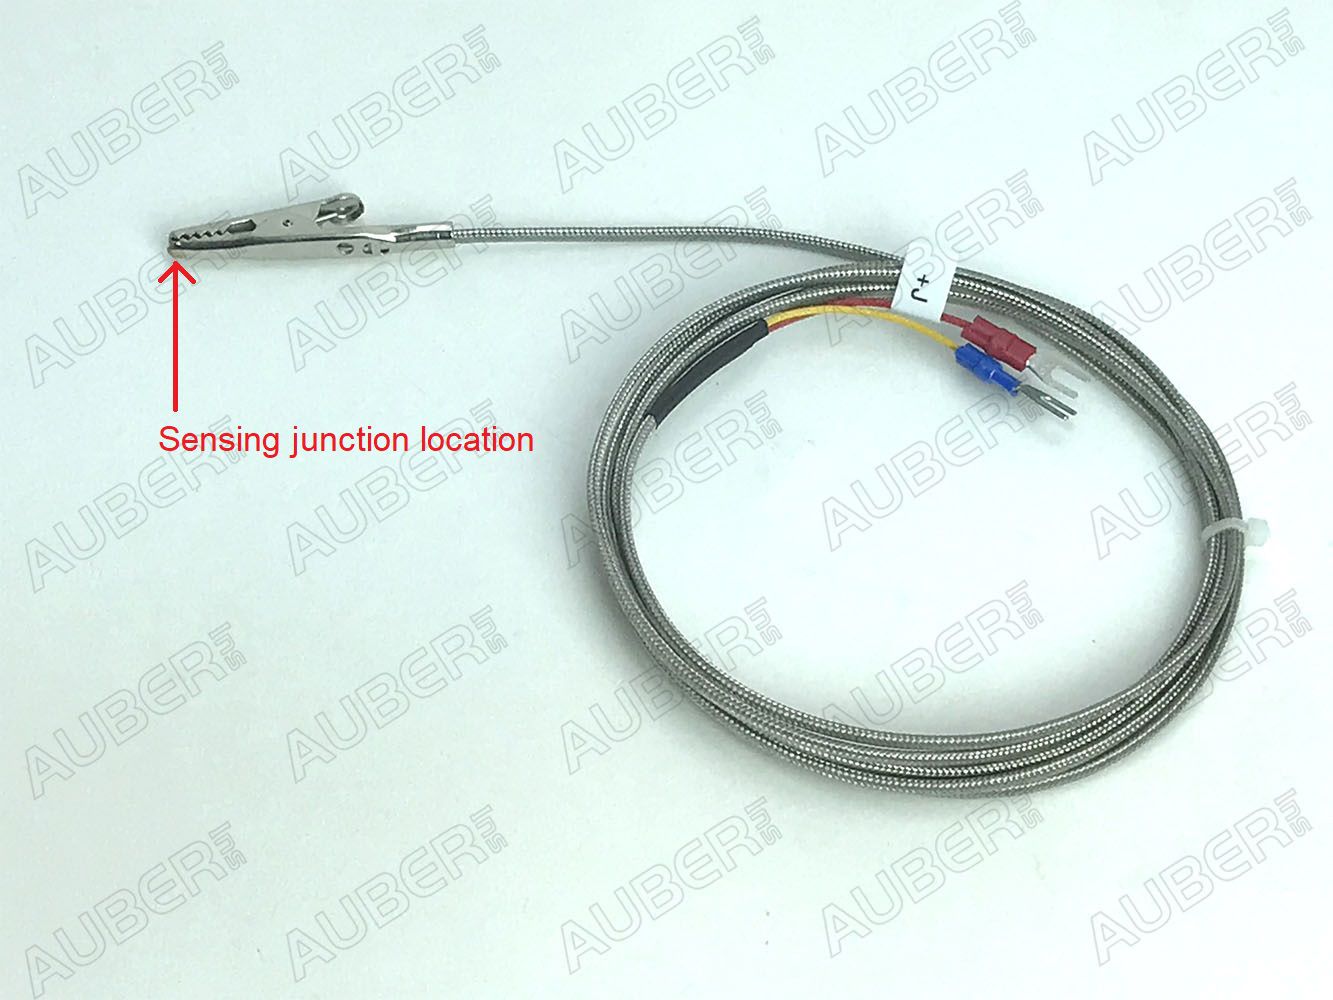 J Type Thermocouple w/ alligator clip tip, powder coating oven